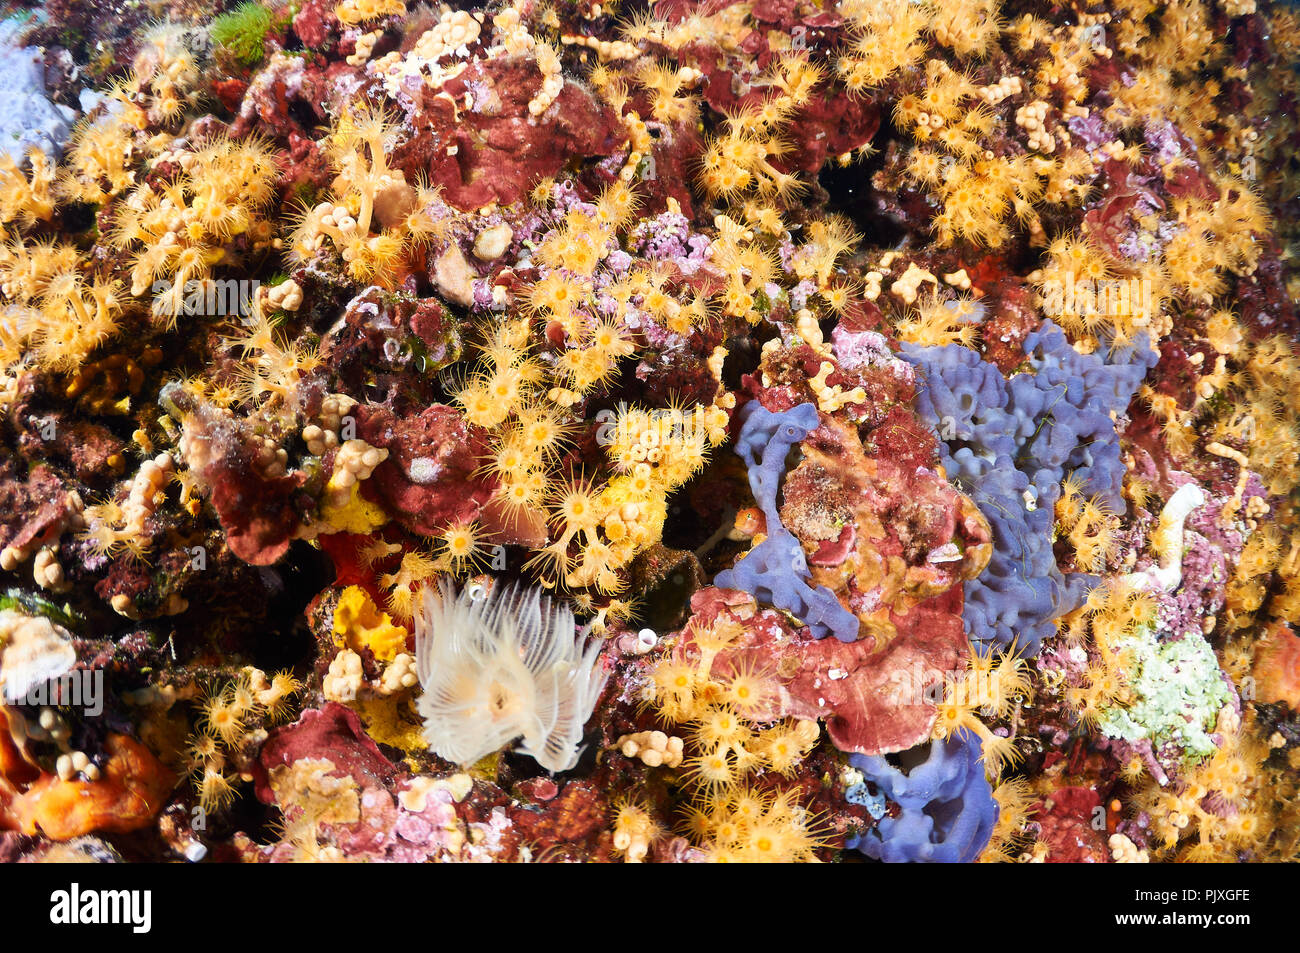 Yellow cluster anemone (Parazoanthus axinellae) colony with a variety of sponges and encrusting life (Formentera,Balearic Islands,Spain) Stock Photo